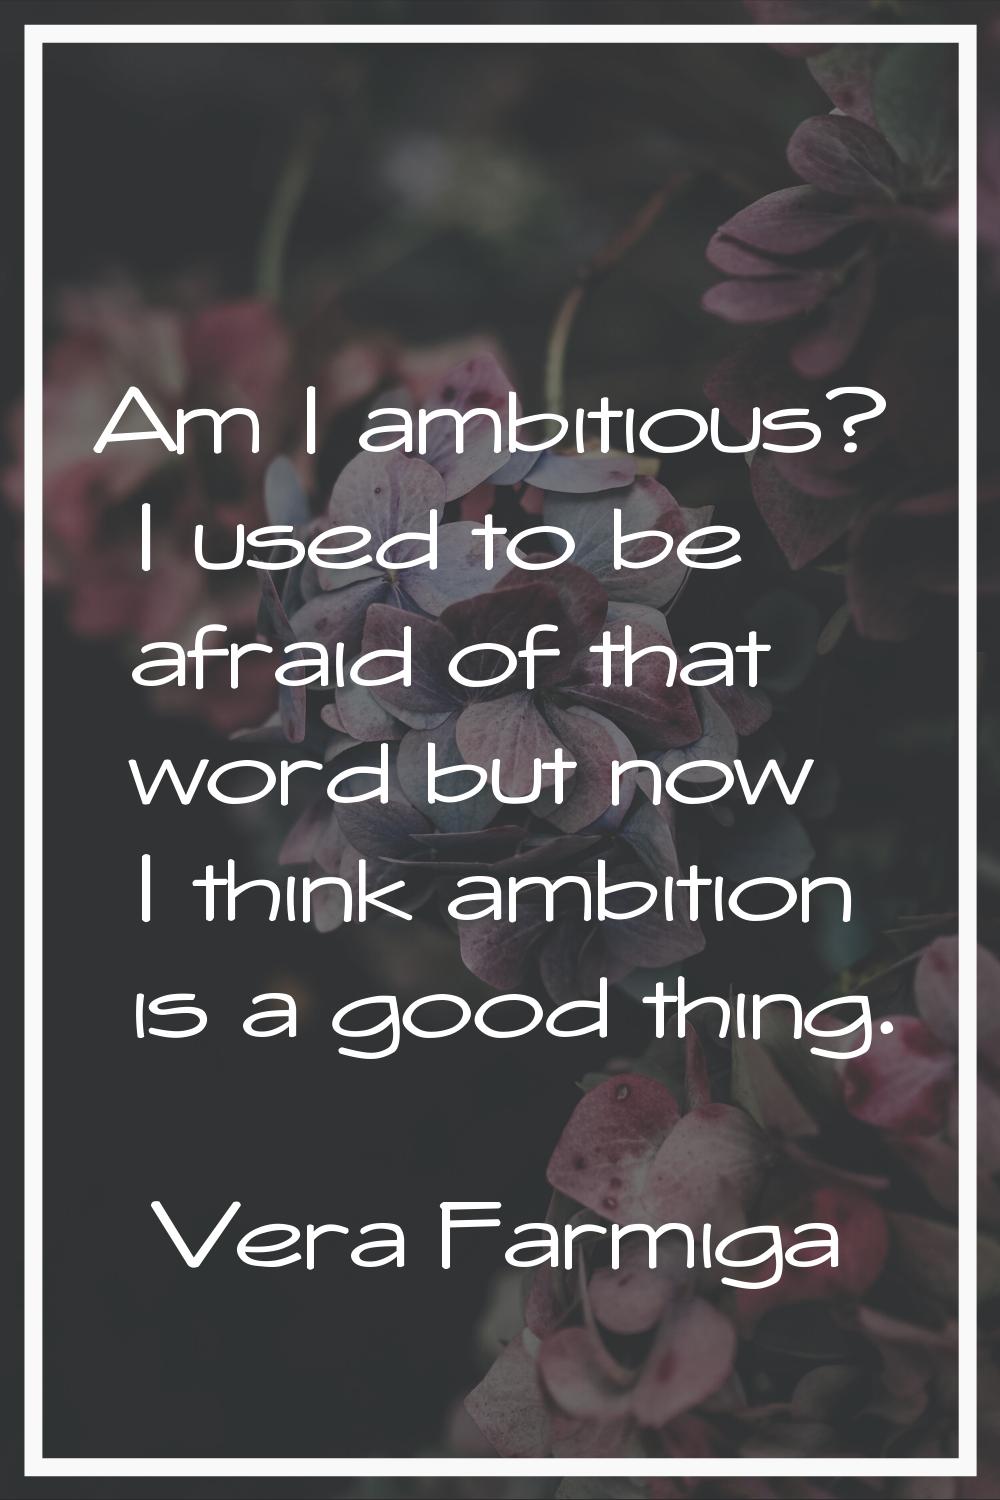 Am I ambitious? I used to be afraid of that word but now I think ambition is a good thing.